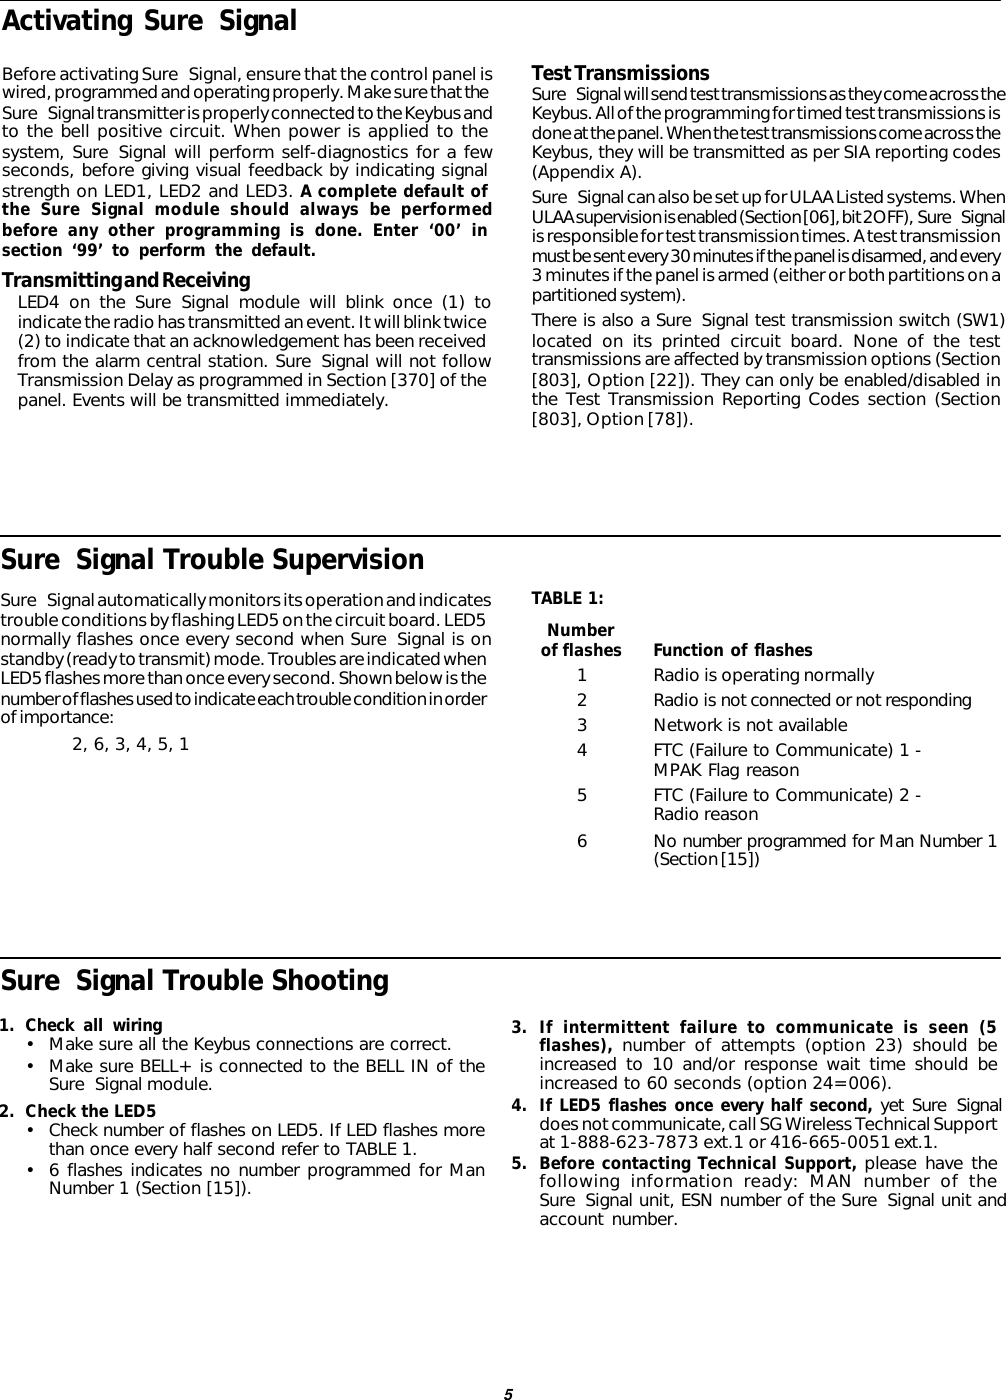 5Activating Sure SignalBefore activating Sure Signal, ensure that the control panel iswired, programmed and operating properly. Make sure that theSure Signal transmitter is properly connected to the Keybus andto the bell positive circuit. When power is applied to thesystem, Sure Signal will perform self-diagnostics for a fewseconds, before giving visual feedback by indicating signalstrength on LED1, LED2 and LED3. A complete default ofthe Sure Signal module should always be performedbefore any other programming is done. Enter ‘00’ insection ‘99’ to perform the default.Transmitting and ReceivingLED4 on the Sure Signal module will blink once (1) toindicate the radio has transmitted an event. It will blink twice(2) to indicate that an acknowledgement has been receivedfrom the alarm central station. Sure Signal will not followTransmission Delay as programmed in Section [370] of thepanel. Events will be transmitted immediately.Test TransmissionsSure Signal will send test transmissions as they come across theKeybus. All of the programming for timed test transmissions isdone at the panel. When the test transmissions come across theKeybus, they will be transmitted as per SIA reporting codes(Appendix A).Sure Signal can also be set up for ULAA Listed systems. WhenULAA supervision is enabled (Section [06], bit 2OFF),  Sure Signalis responsible for test transmission times. A test transmissionmust be sent every 30 minutes if the panel is disarmed, and every3 minutes if the panel is armed (either or both partitions on apartitioned system).There is also a Sure Signal test transmission switch (SW1)located on its printed circuit board. None of the testtransmissions are affected by transmission options (Section[803], Option [22]). They can only be enabled/disabled inthe Test Transmission Reporting Codes section (Section[803], Option [78]).Sure Signal Trouble SupervisionSure Signal automatically monitors its operation and indicatestrouble conditions by flashing LED5 on the circuit board. LED5normally flashes once every second when Sure Signal is onstandby (ready to transmit) mode. Troubles are indicated whenLED5 flashes more than once every second. Shown below is thenumber of flashes used to indicate each trouble condition in orderof importance:2, 6, 3, 4, 5, 1TABLE 1:Numberof flashes Function of flashes1Radio is operating normally2Radio is not connected or not responding3Network is not available4FTC (Failure to Communicate) 1 -MPAK Flag reason5FTC (Failure to Communicate) 2 -Radio reason6No number programmed for Man Number 1(Section [15])Sure Signal Trouble Shooting1. Check all wiring•Make sure all the Keybus connections are correct.•Make sure BELL+ is connected to the BELL IN of theSure Signal module.2. Check the LED5•Check number of flashes on LED5. If LED flashes morethan once every half second refer to TABLE 1.•6 flashes indicates no number programmed for ManNumber 1 (Section [15]).3. If intermittent failure to communicate is seen (5flashes), number of attempts (option 23) should beincreased to 10 and/or response wait time should beincreased to 60 seconds (option 24=006).4. If LED5 flashes once every half second, yet Sure Signaldoes not communicate, call SG Wireless Technical Supportat 1-888-623-7873 ext.1 or 416-665-0051 ext.1.5. Before contacting Technical Support, please have thefollowing information ready: MAN number of theSure Signal unit, ESN number of the Sure Signal unit andaccount number.